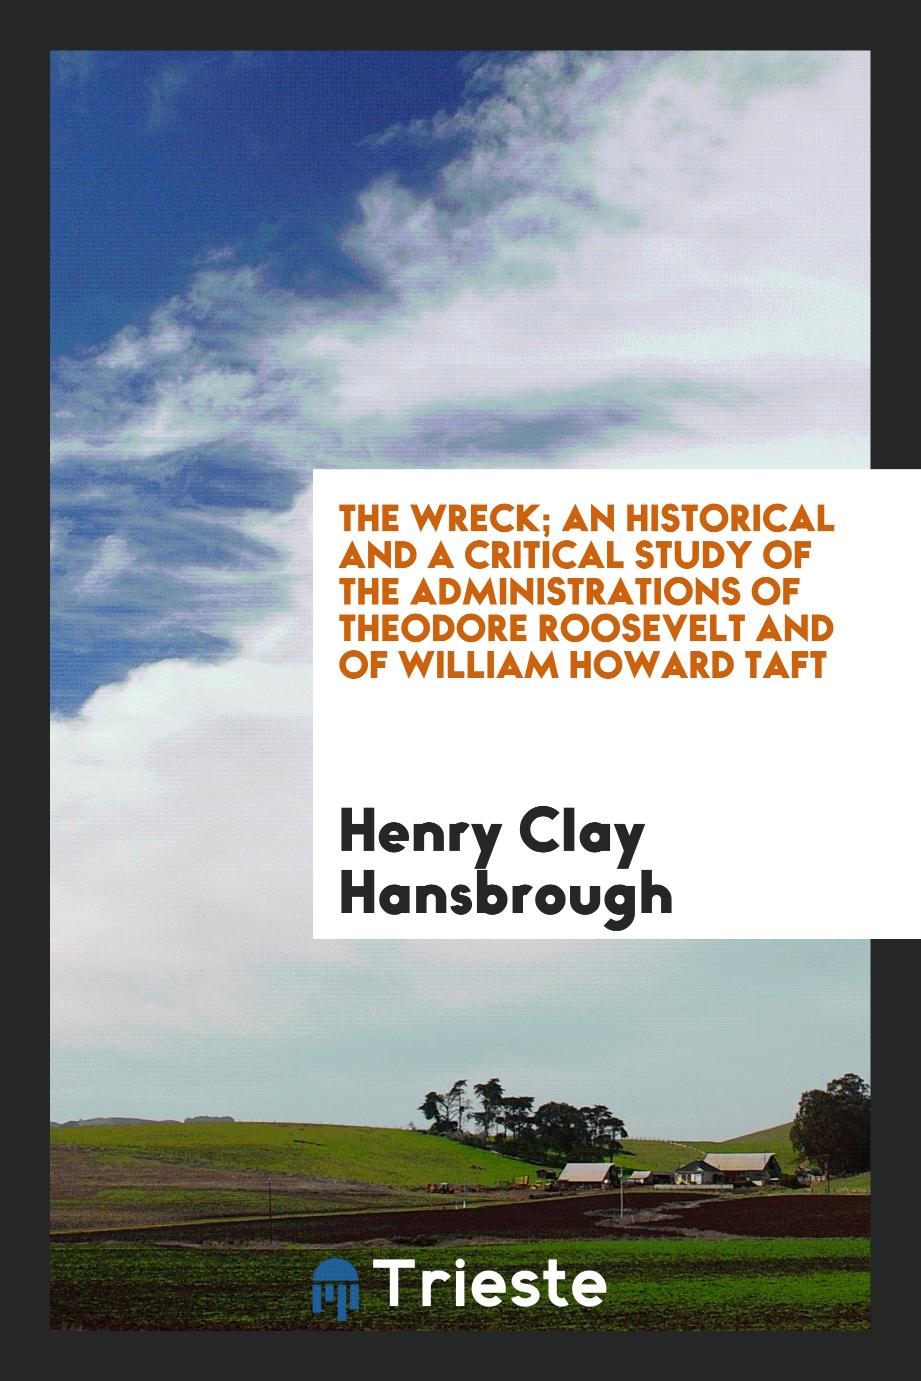 The wreck; an historical and a critical study of the administrations of Theodore Roosevelt and of William Howard Taft